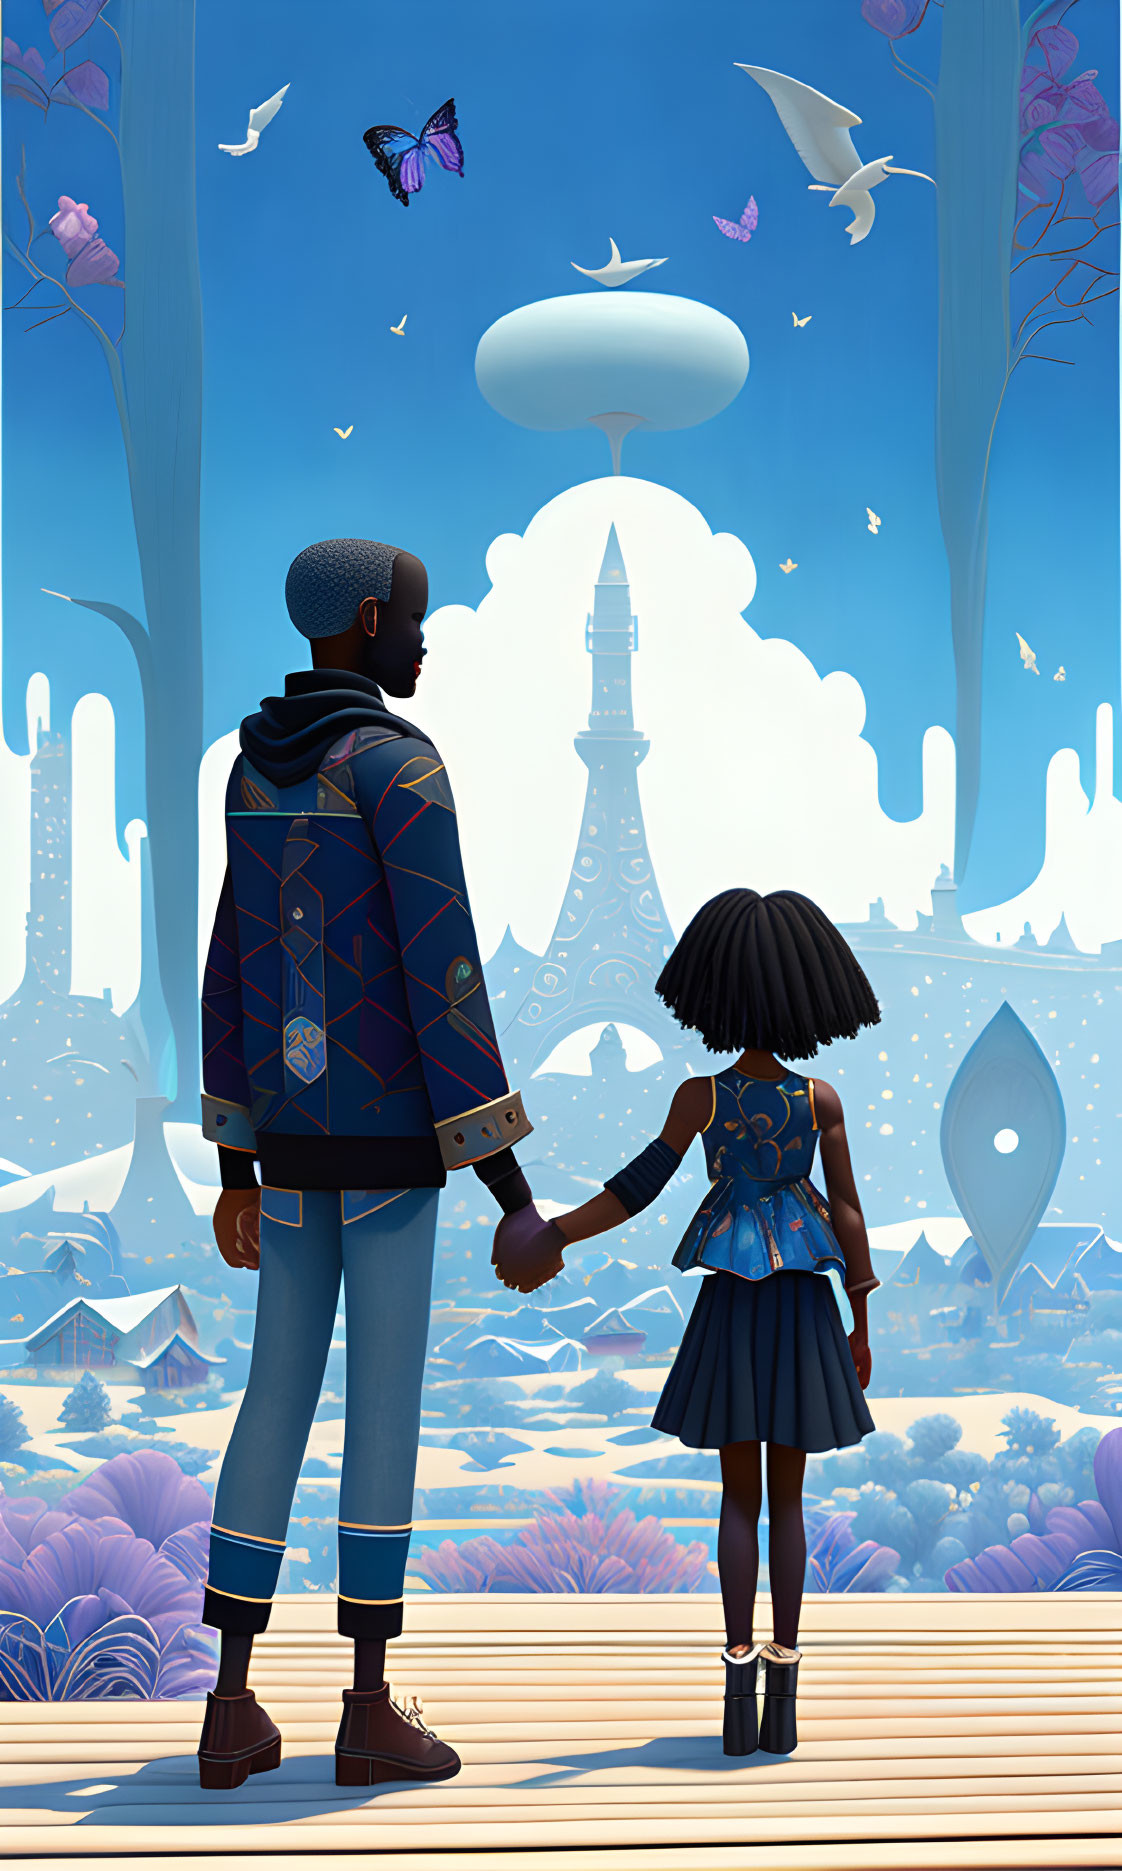 Adult and child gaze at futuristic cityscape with colorful trees and flying vehicles